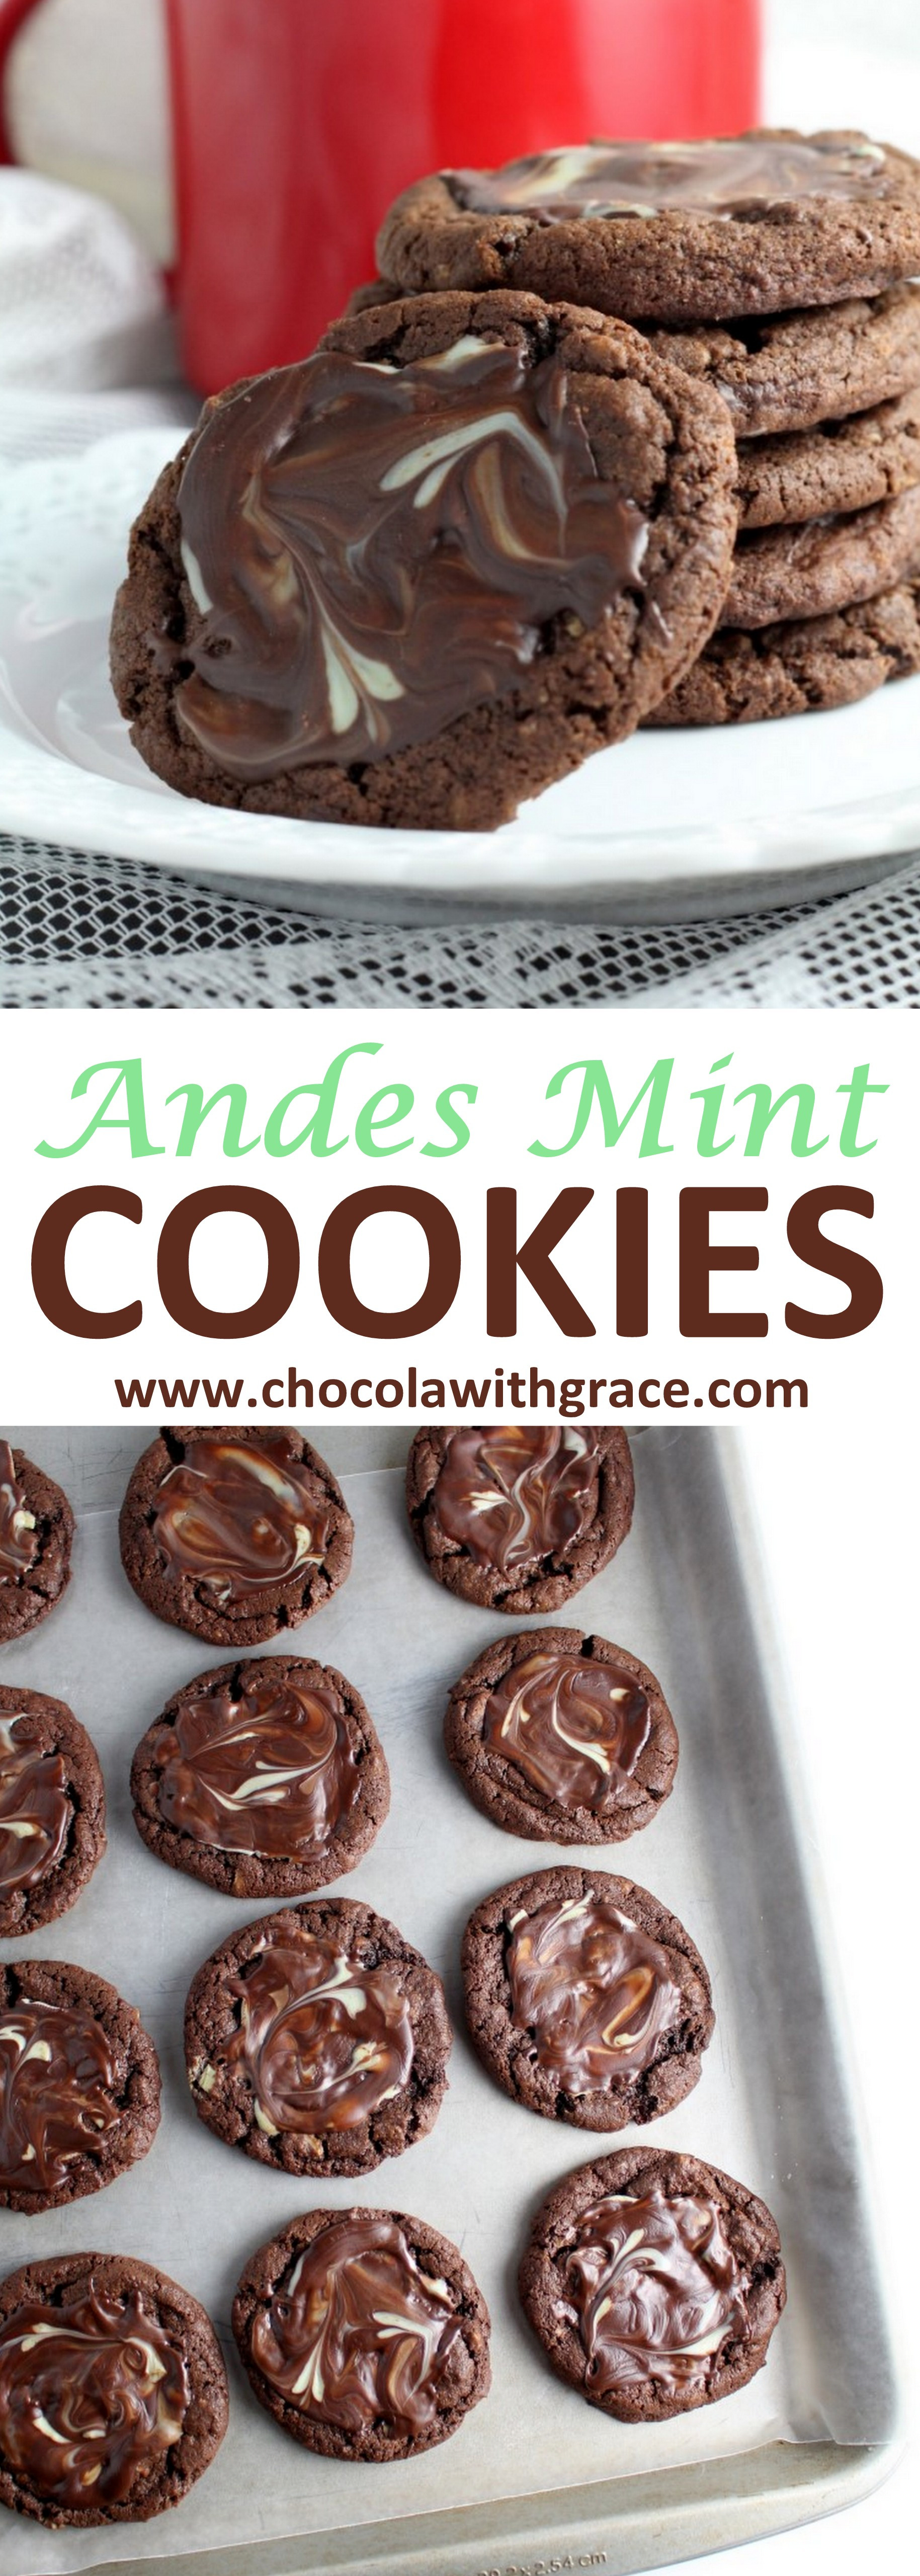 Mint Christmas Cookies
 Andes Mint Cookies Chocolate With Grace